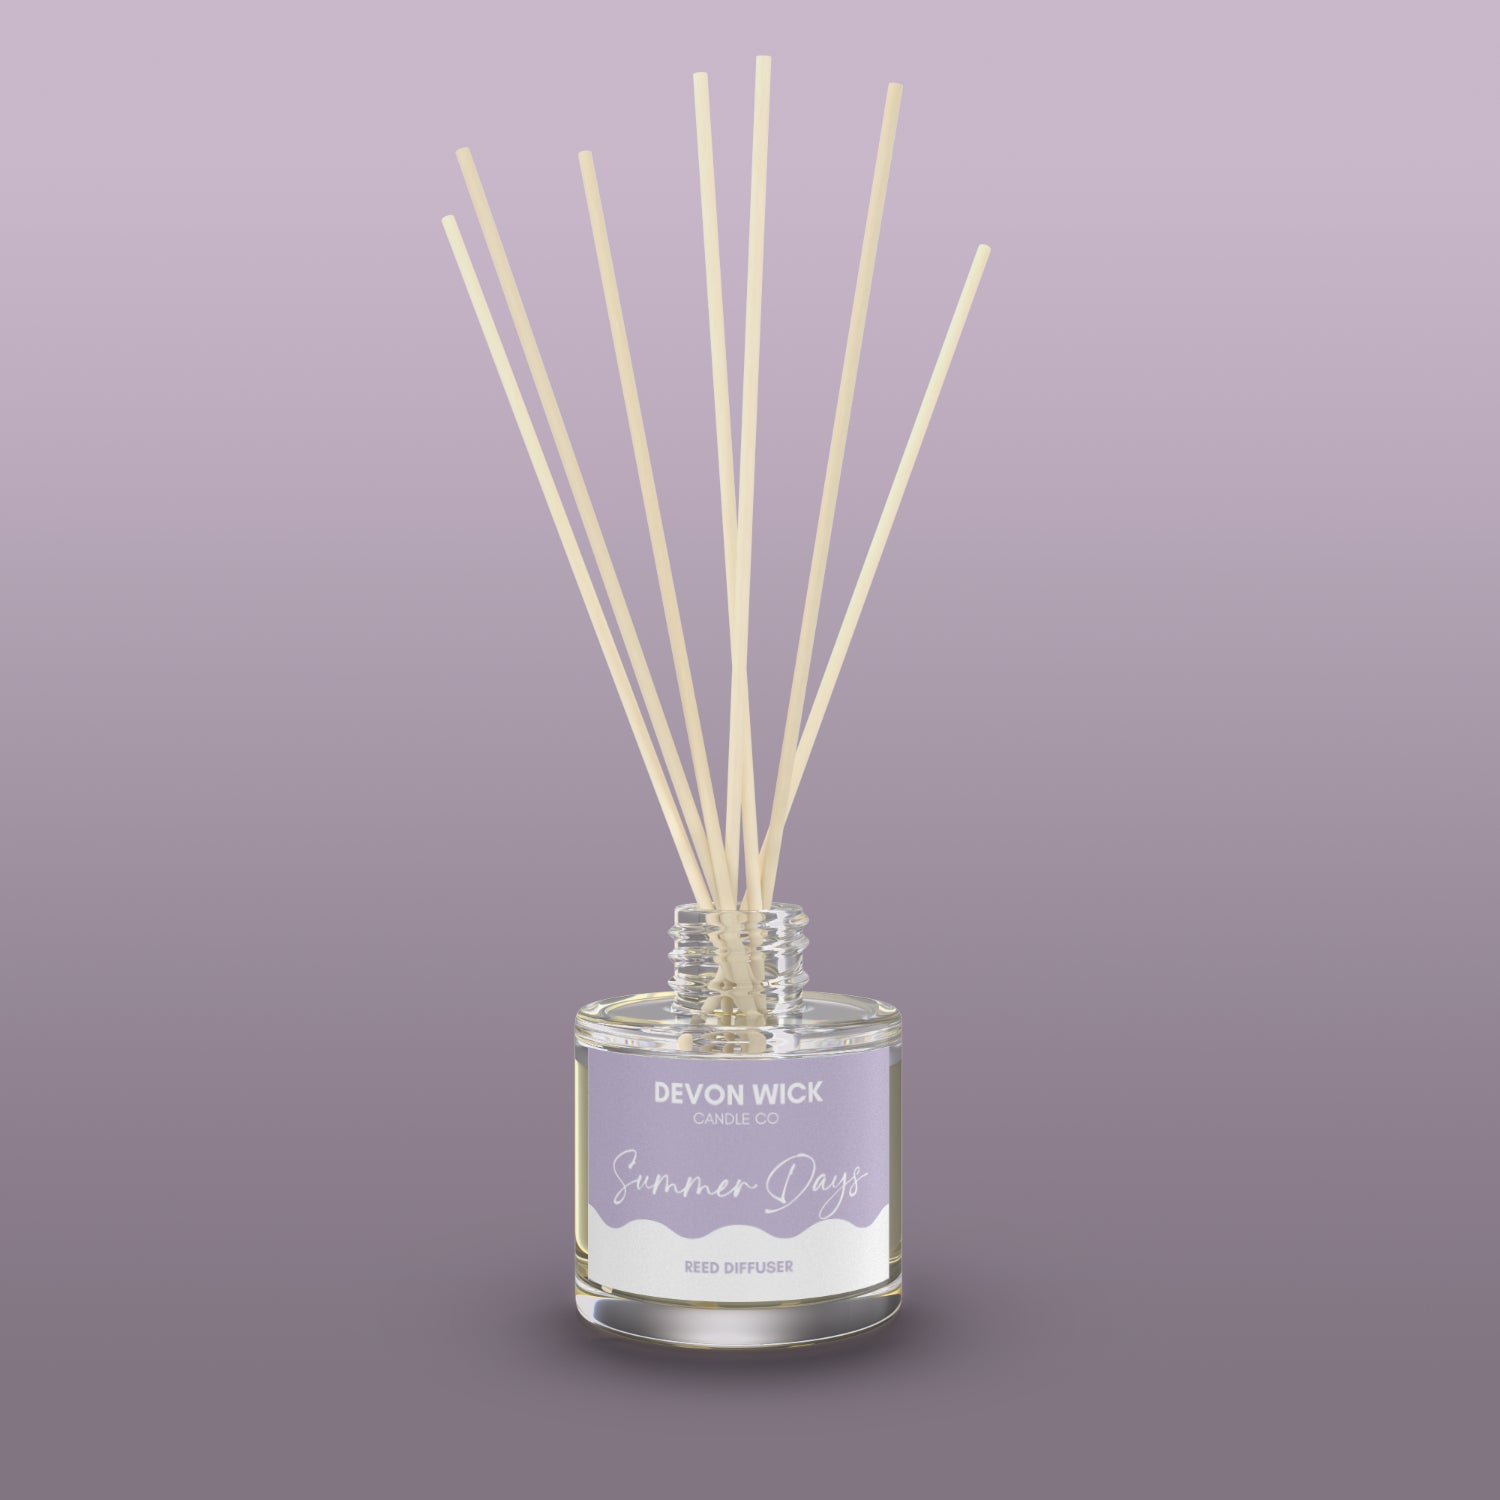 Devon Wick Candle Co. Limited Summer Days Reed Diffuser